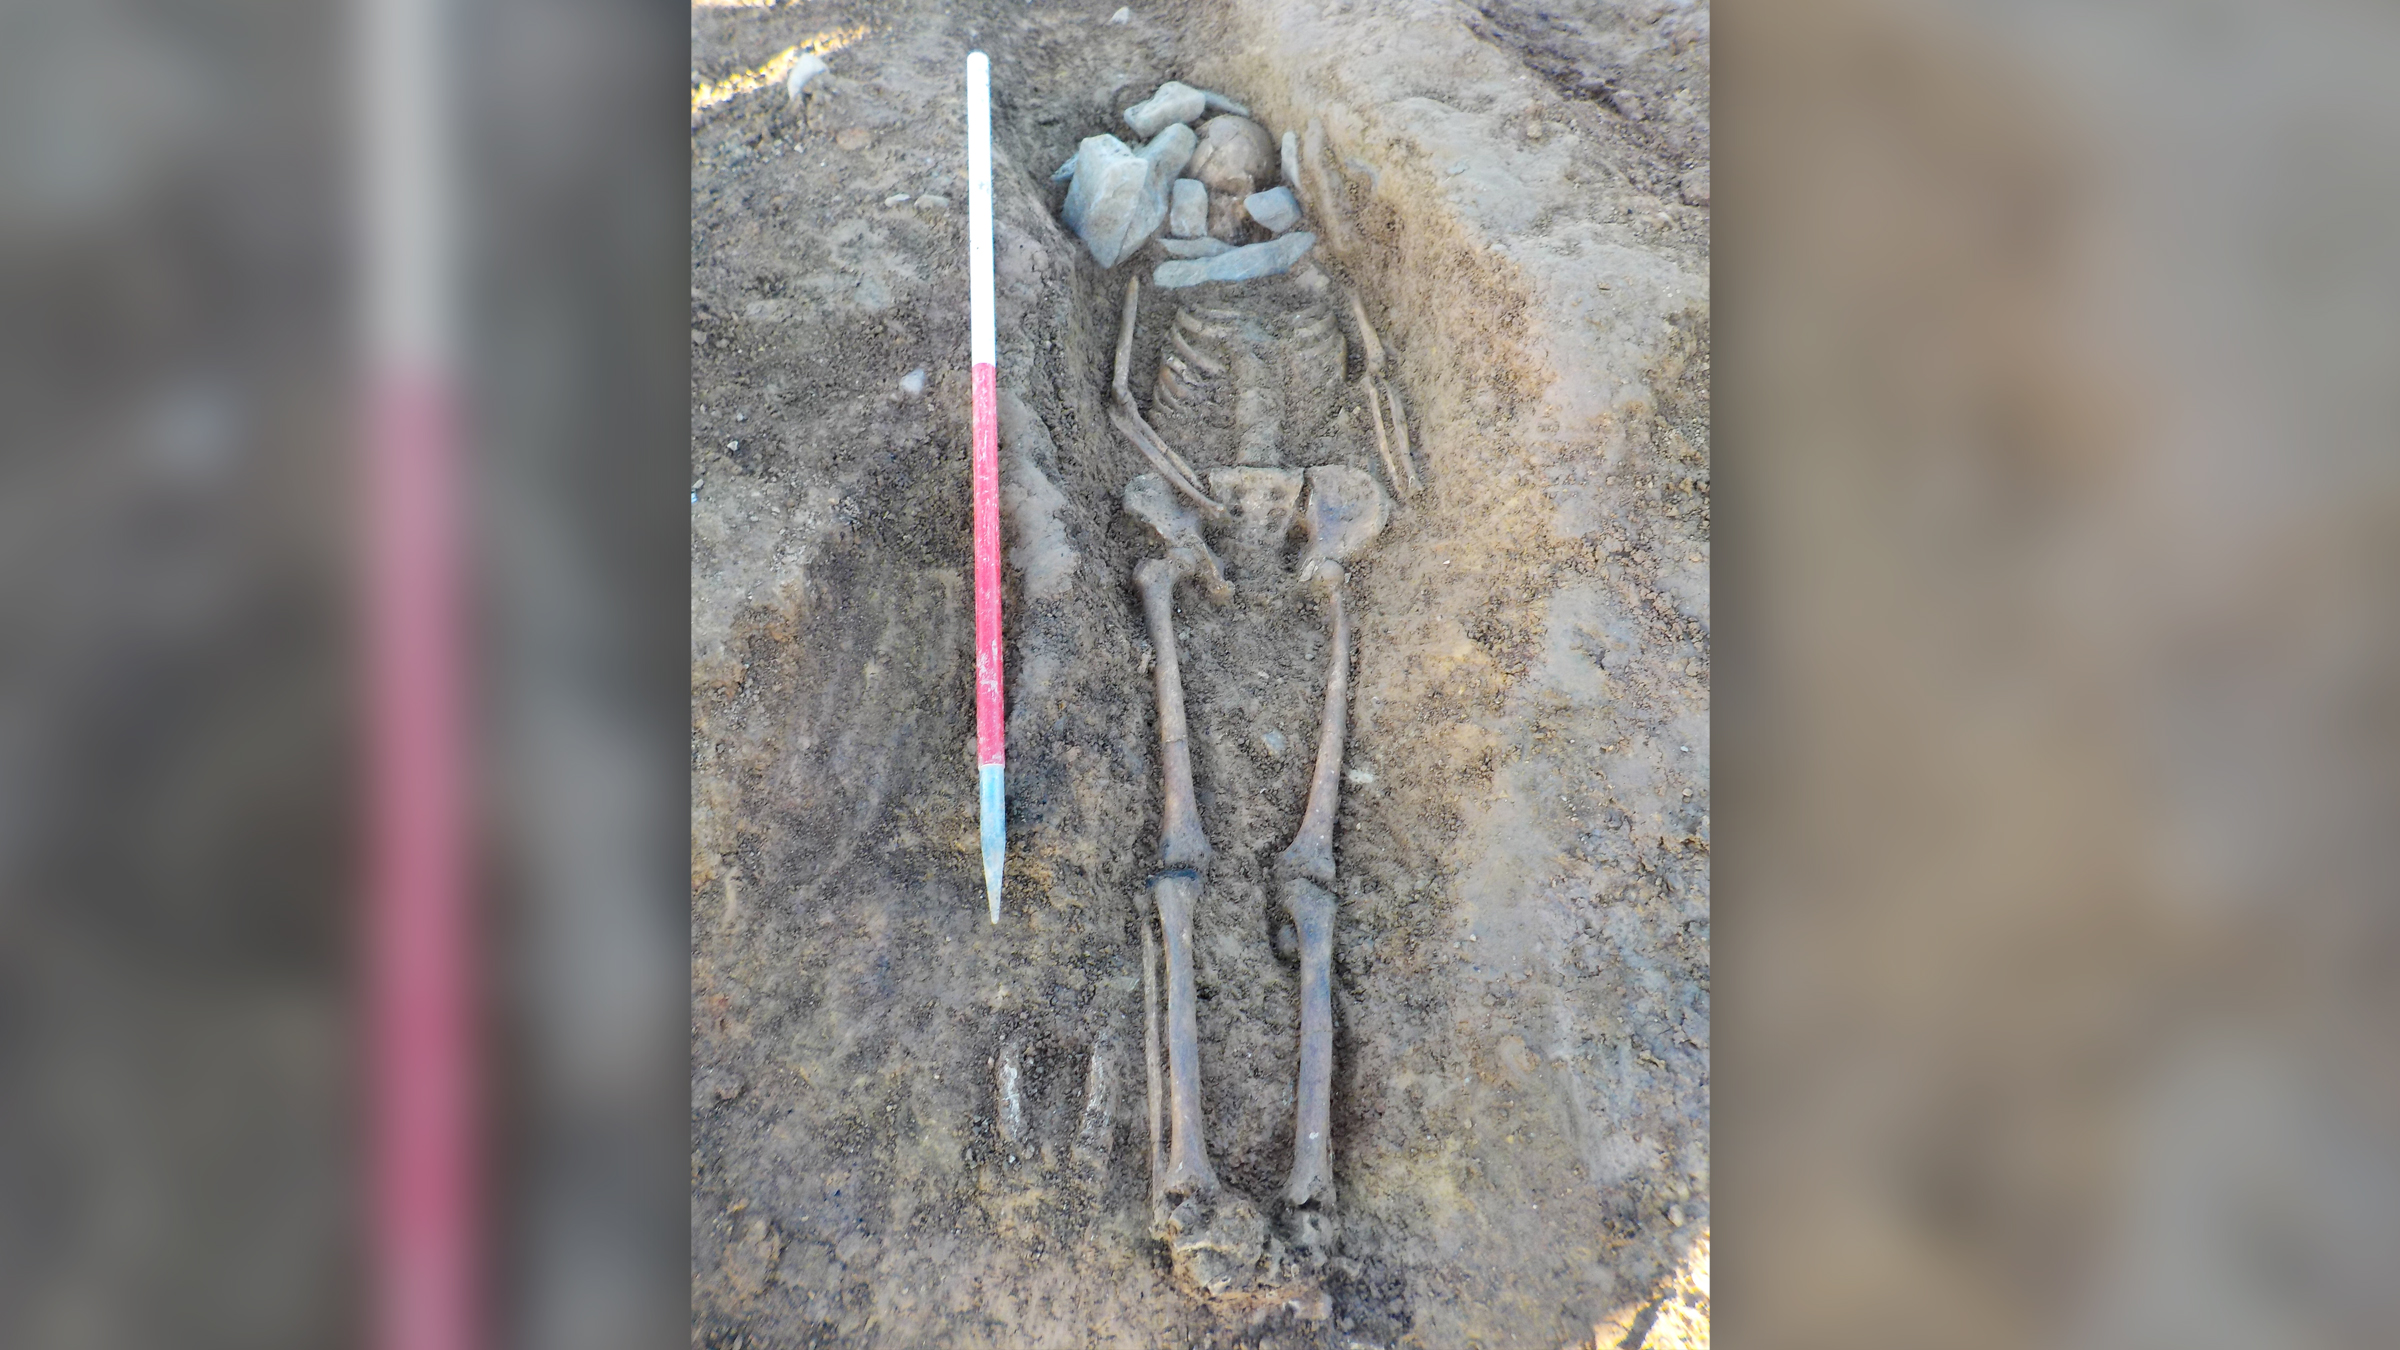 An early medieval skeleton found in burial monument that was first used during the Bronze Age.